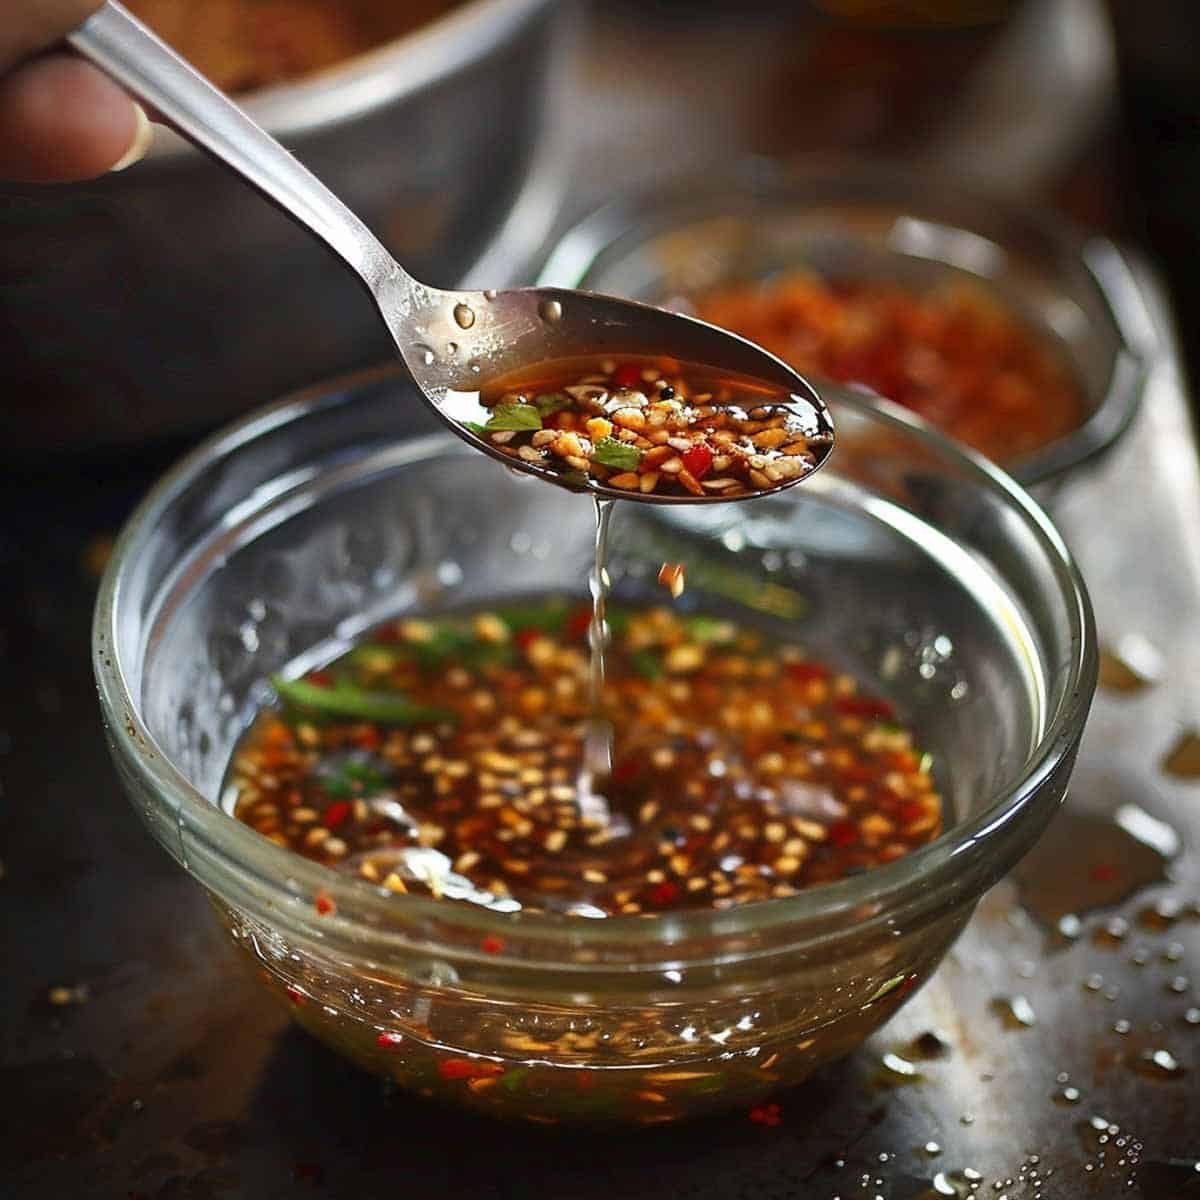 Mixing dressing for Nam Tok: combining fish sauce, lime juice, sugar, and chili flakes in a bowl